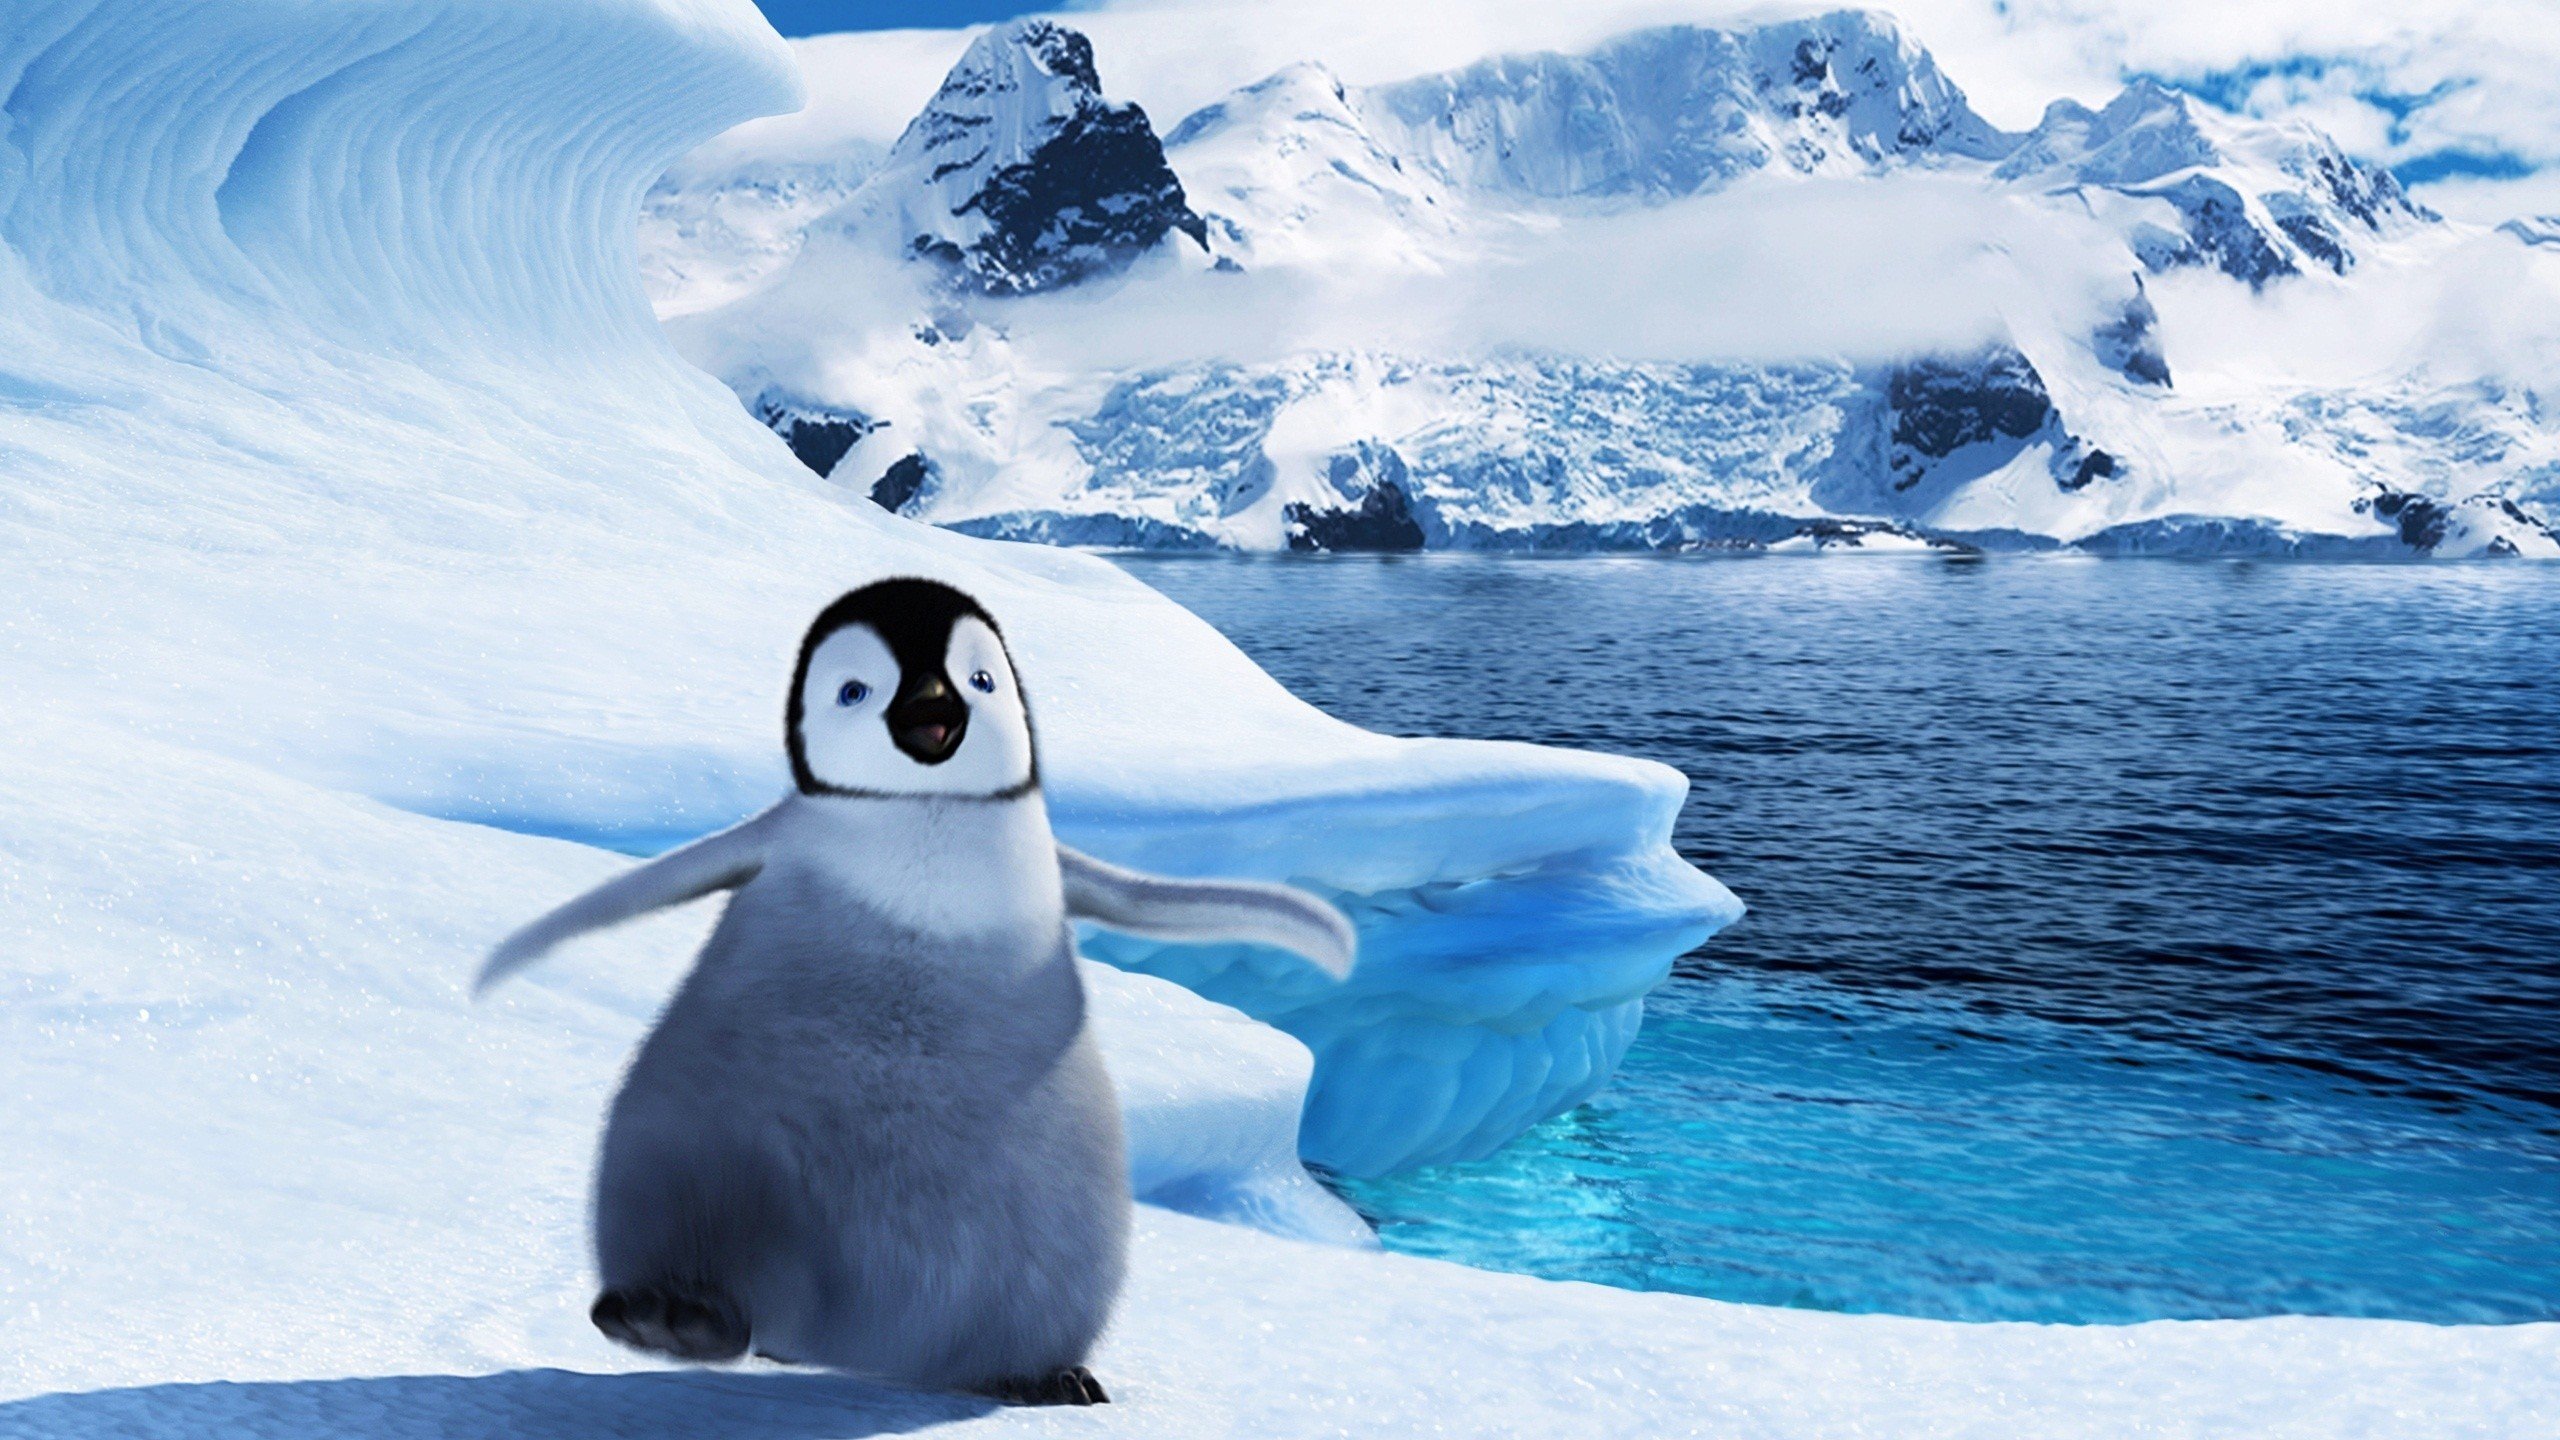 High resolution Happy Feet hd 2560x1440 background ID:146157 for PC